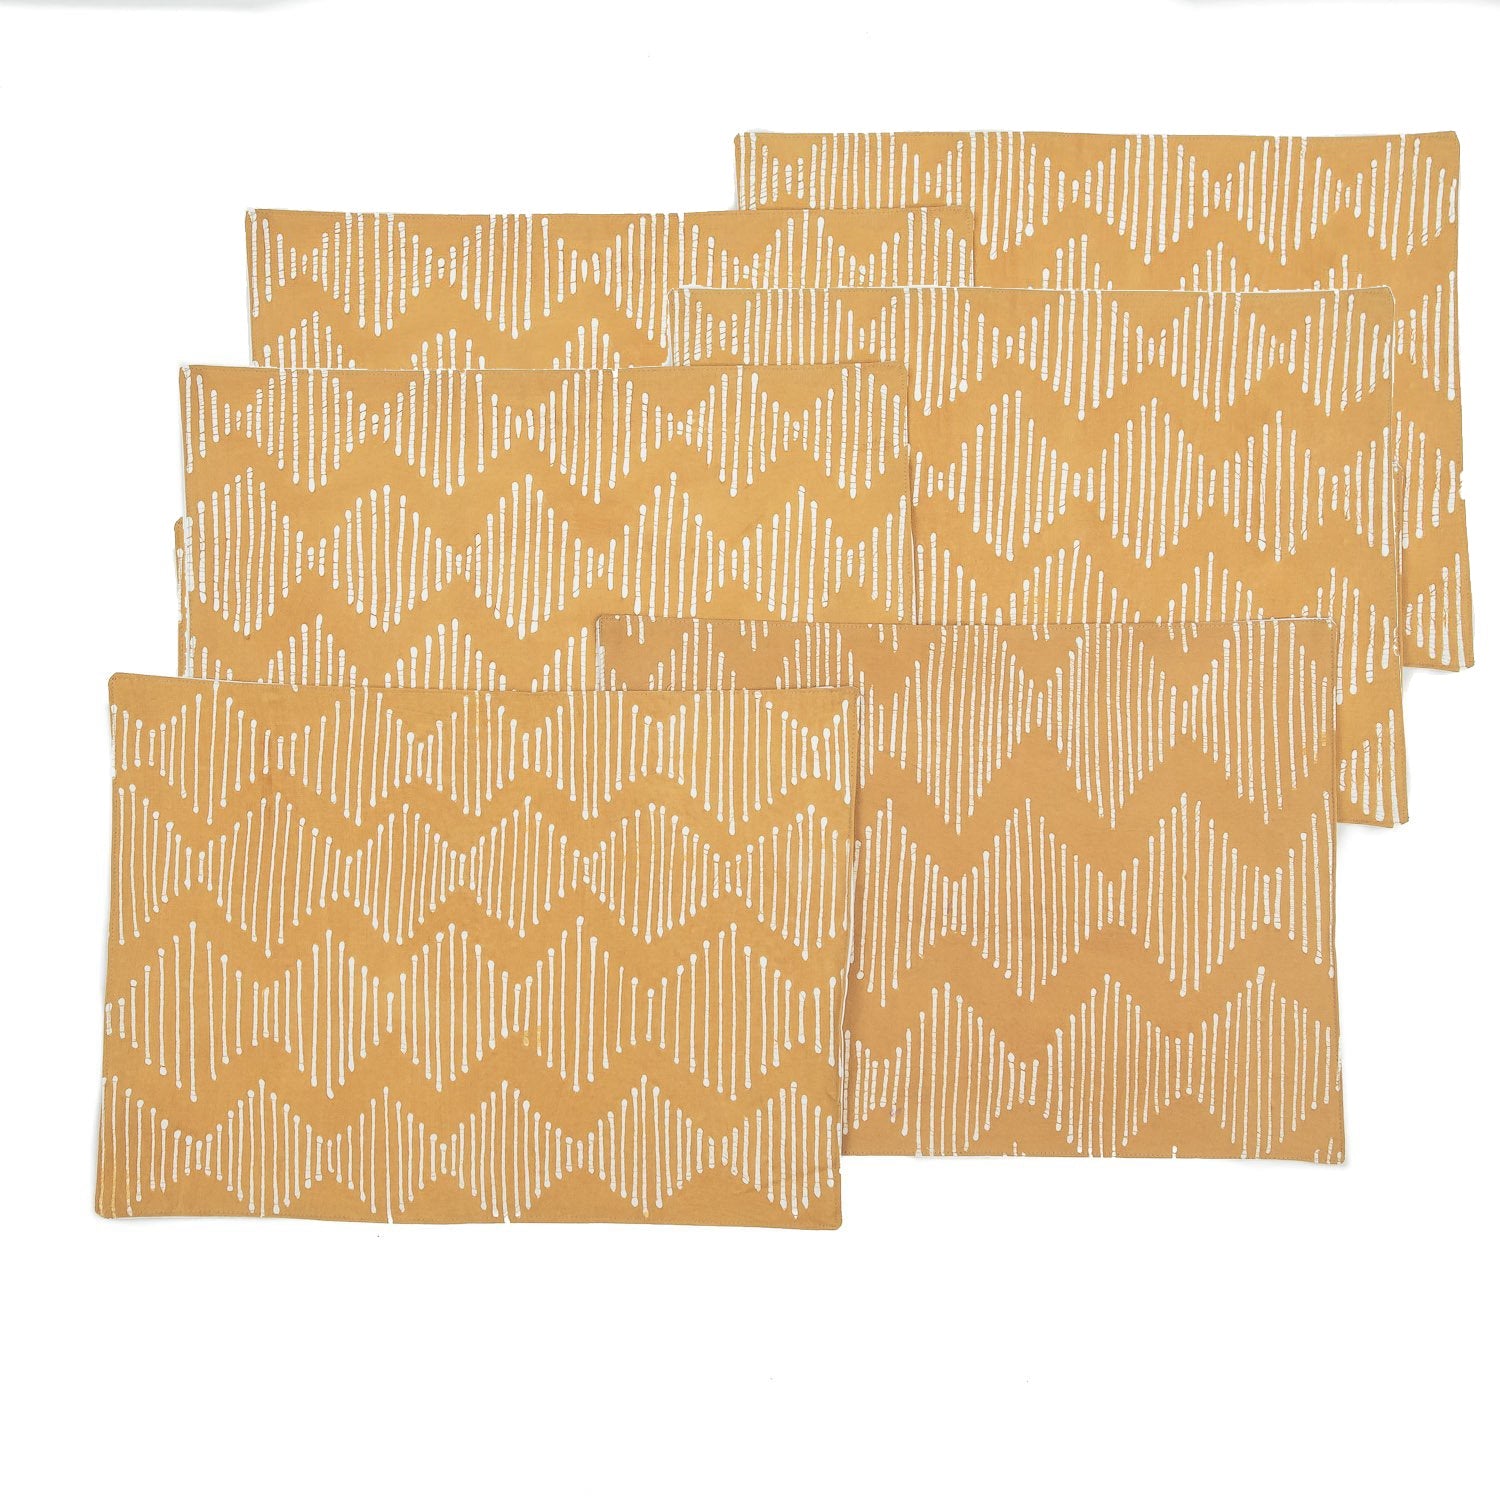 Tribal Cloth Mushroom Line Waves Table Mats - Handmade by TRIBAL TEXTILES - Handcrafted Home Decor Interiors - African Made